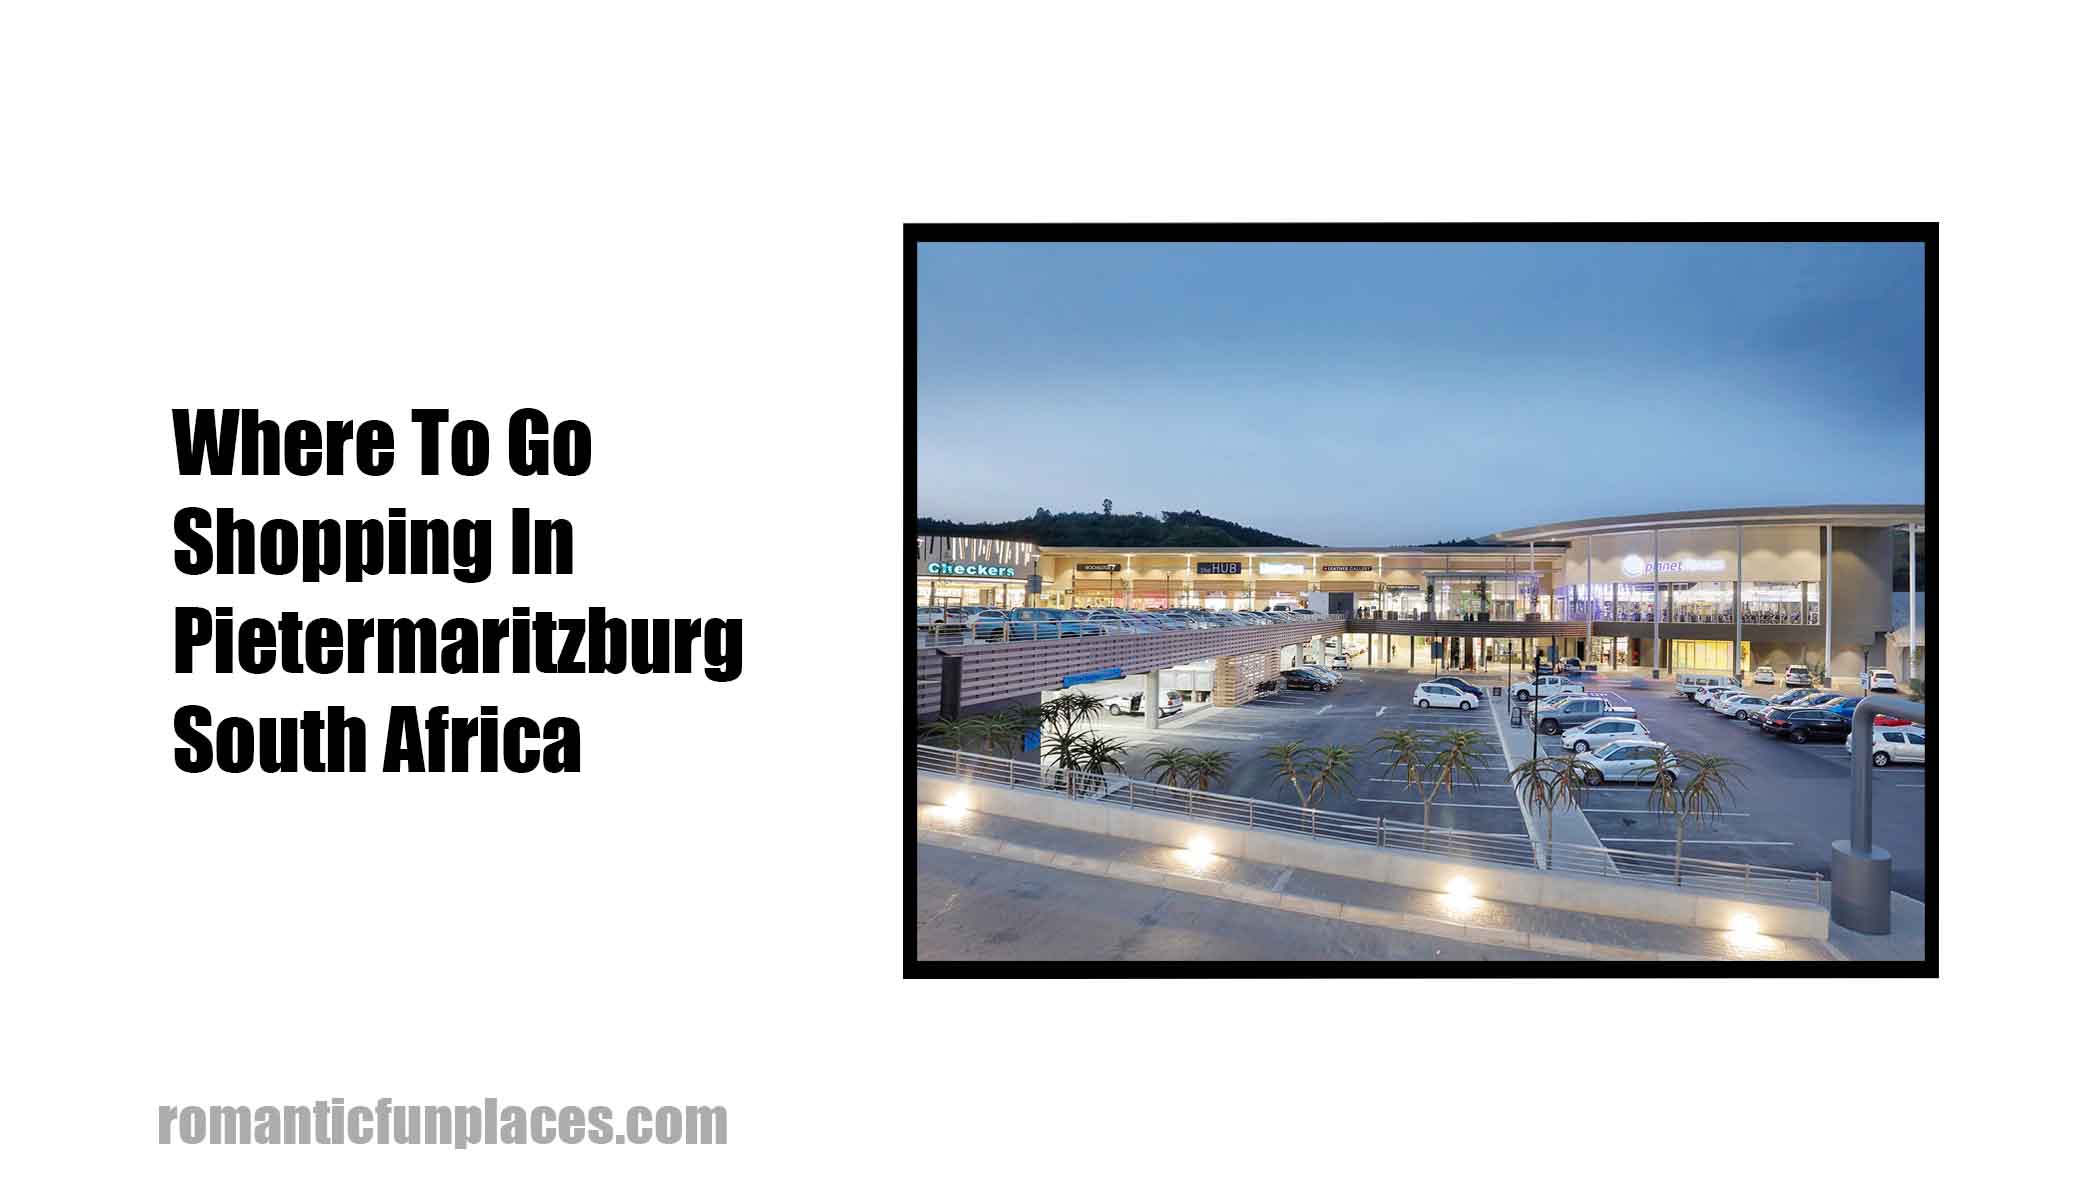 Where To Go Shopping In Pietermaritzburg South Africa